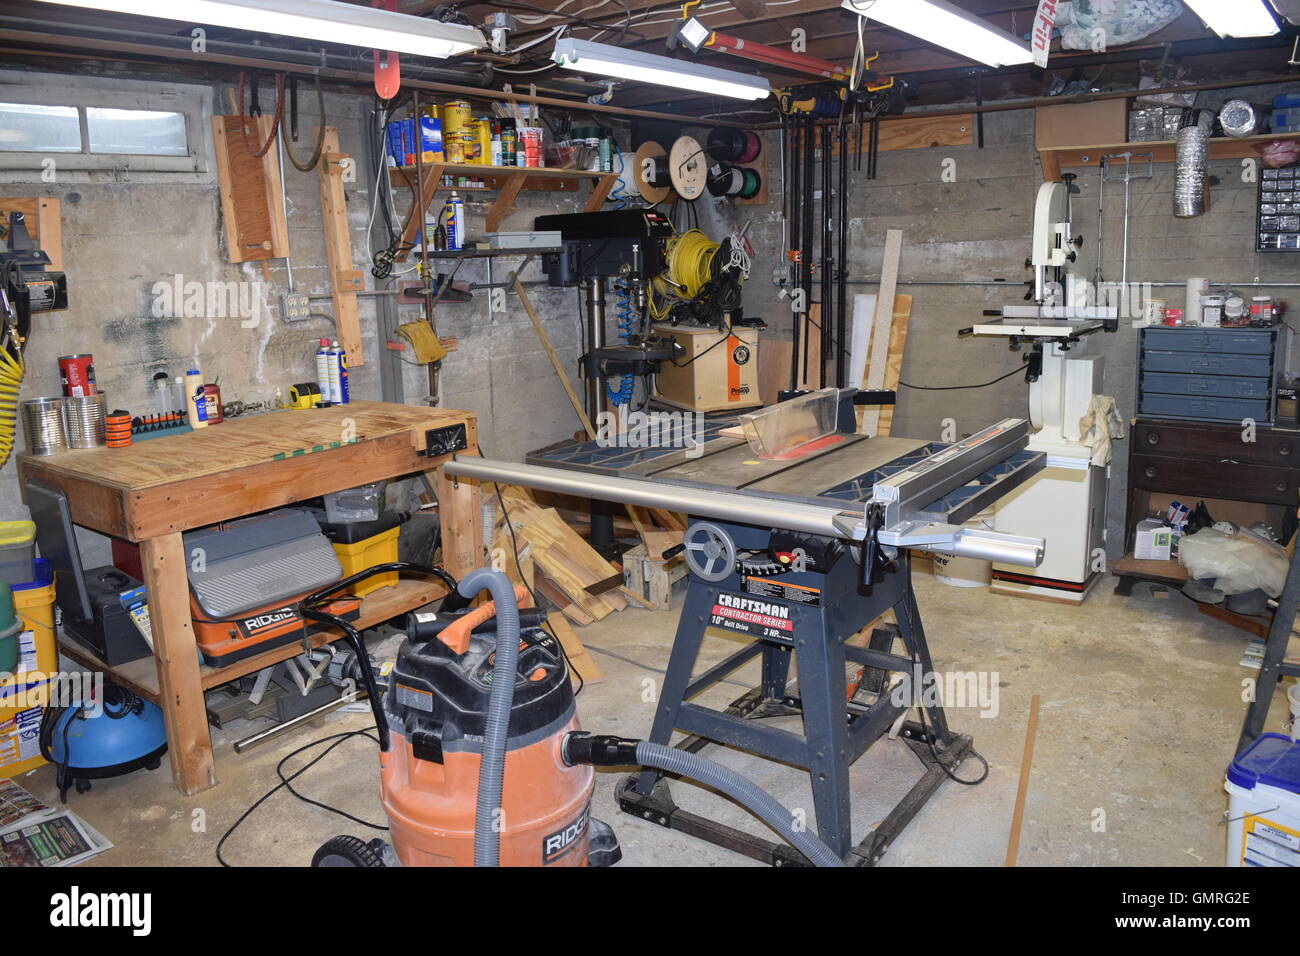 Workshop Machinery Room with Table Saw, Shopvac and Band Saw Stock Photo